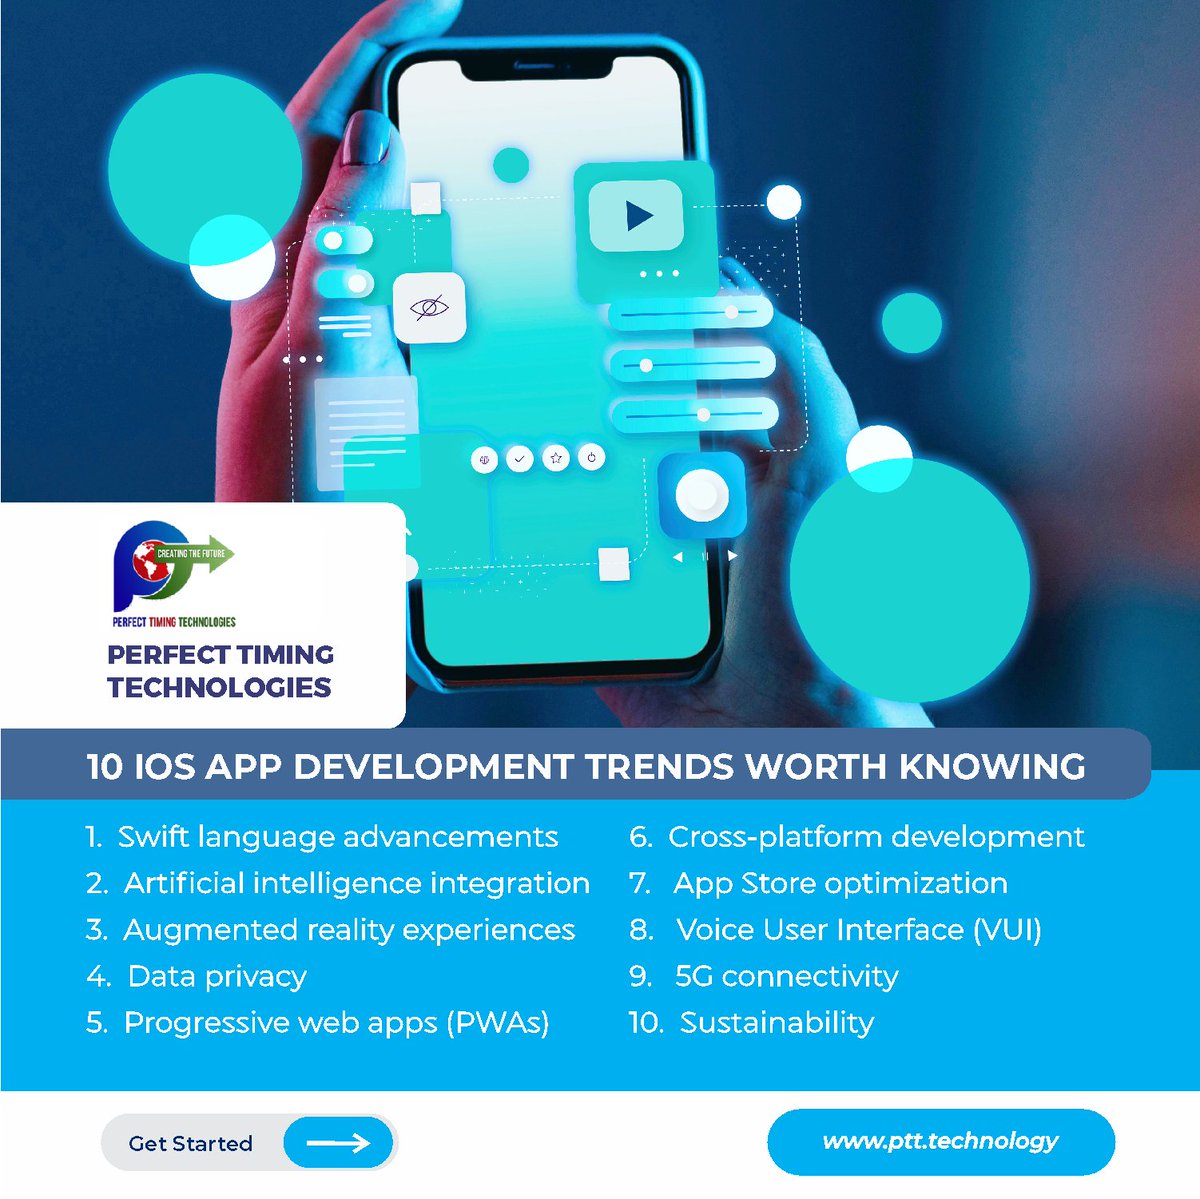 10 iOS App Development Trends Worth Knowing

Read the full article at builtin.com/software-engin…

#PerfectTimingTechnologies #PerfectTimingHolding #iOSAppDevelopment #AppDevelopment #iOSApps #MobileApps #TechTrends #SwiftProgramming #AppDesign #UserExperience #MobileDevelopment